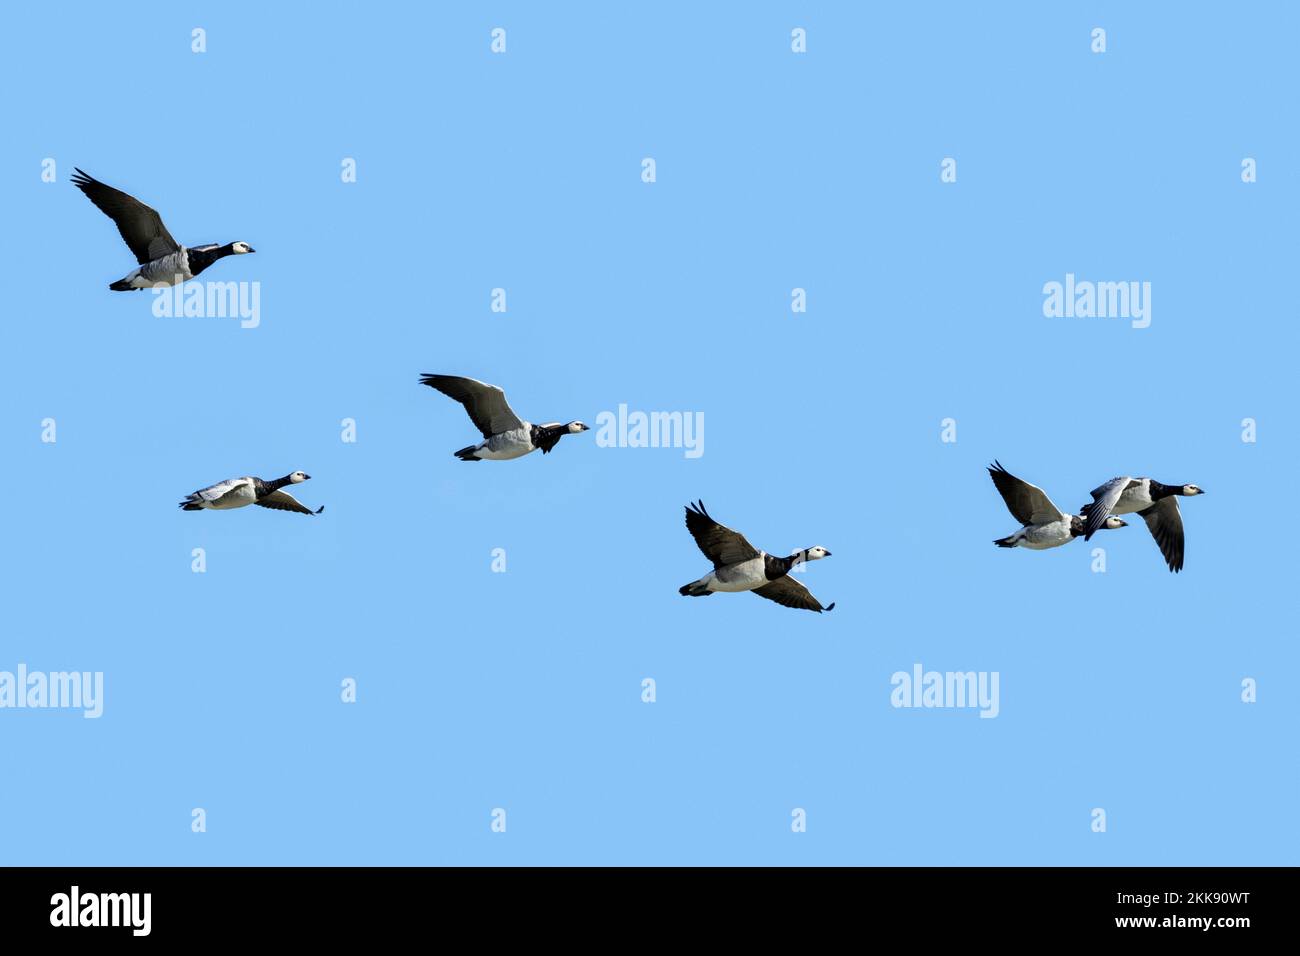 Flock of migrating barnacle geese (Branta leucopsis) flying against blue sky during autumn migration Stock Photo